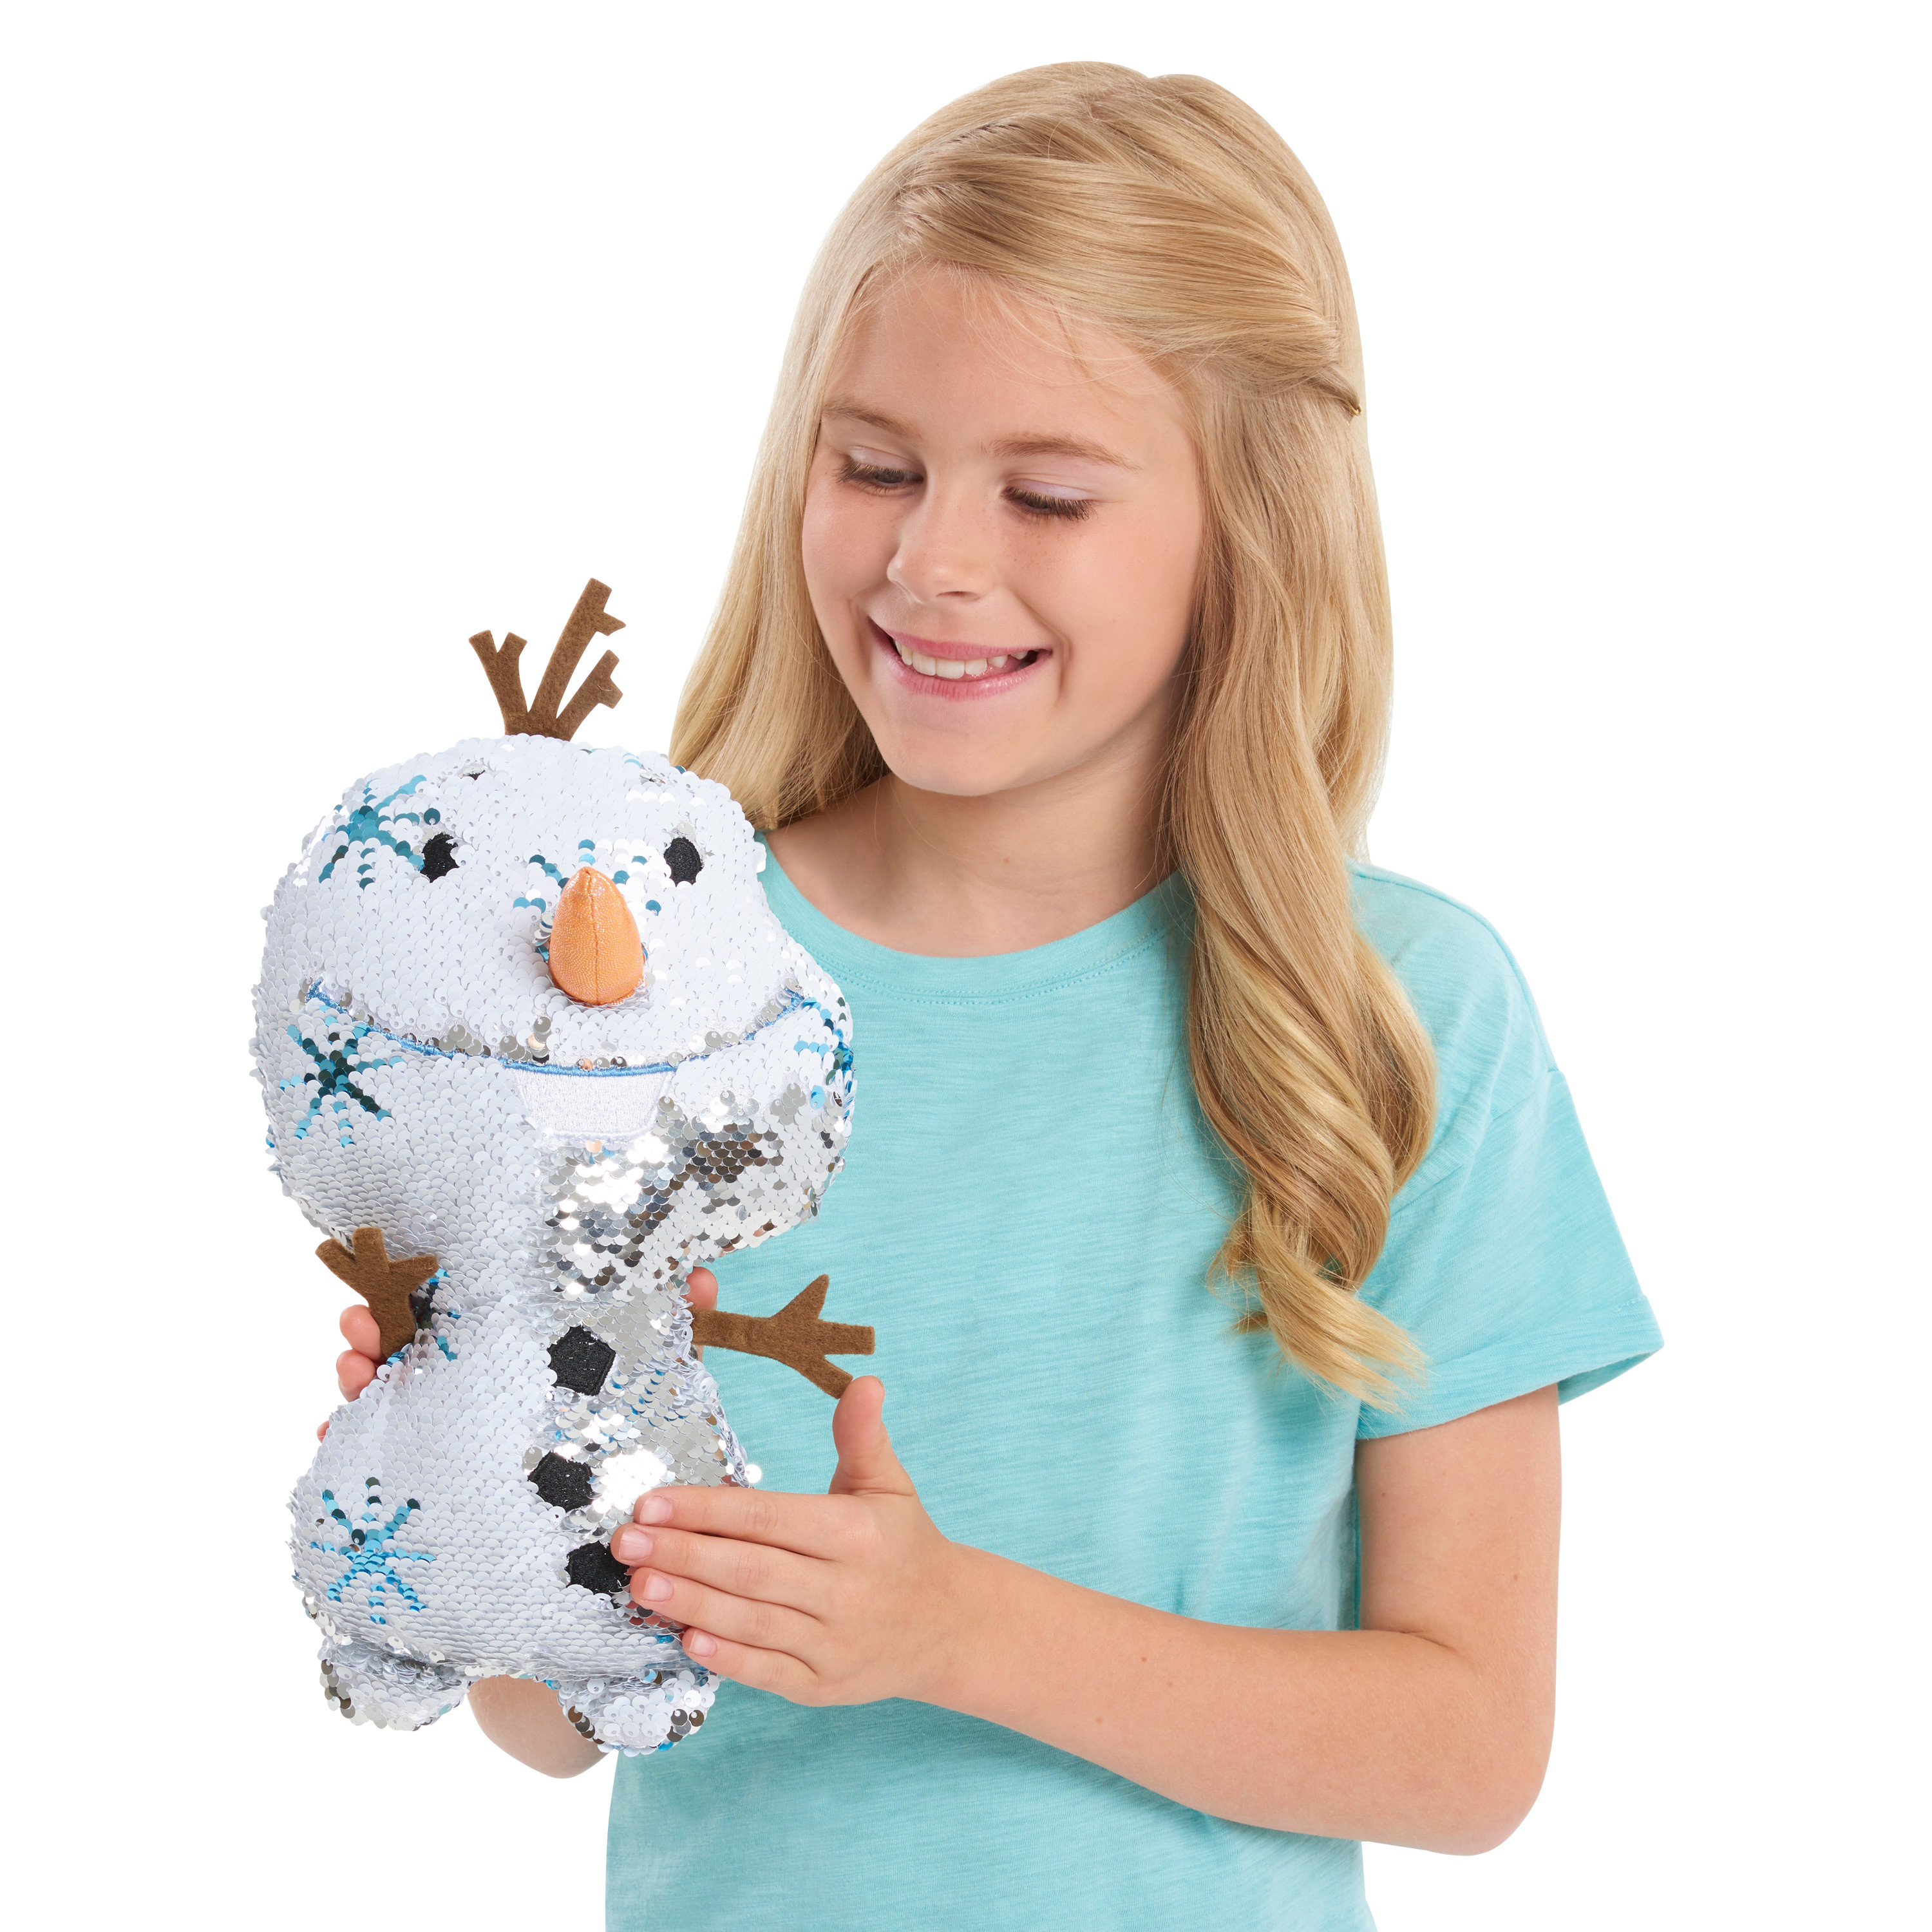 Disney Frozen 2 Reversible Sequins Large Plush Olaf, Officially Licensed Kids Toys for Ages 3 Up, Gifts and Presents - image 2 of 5